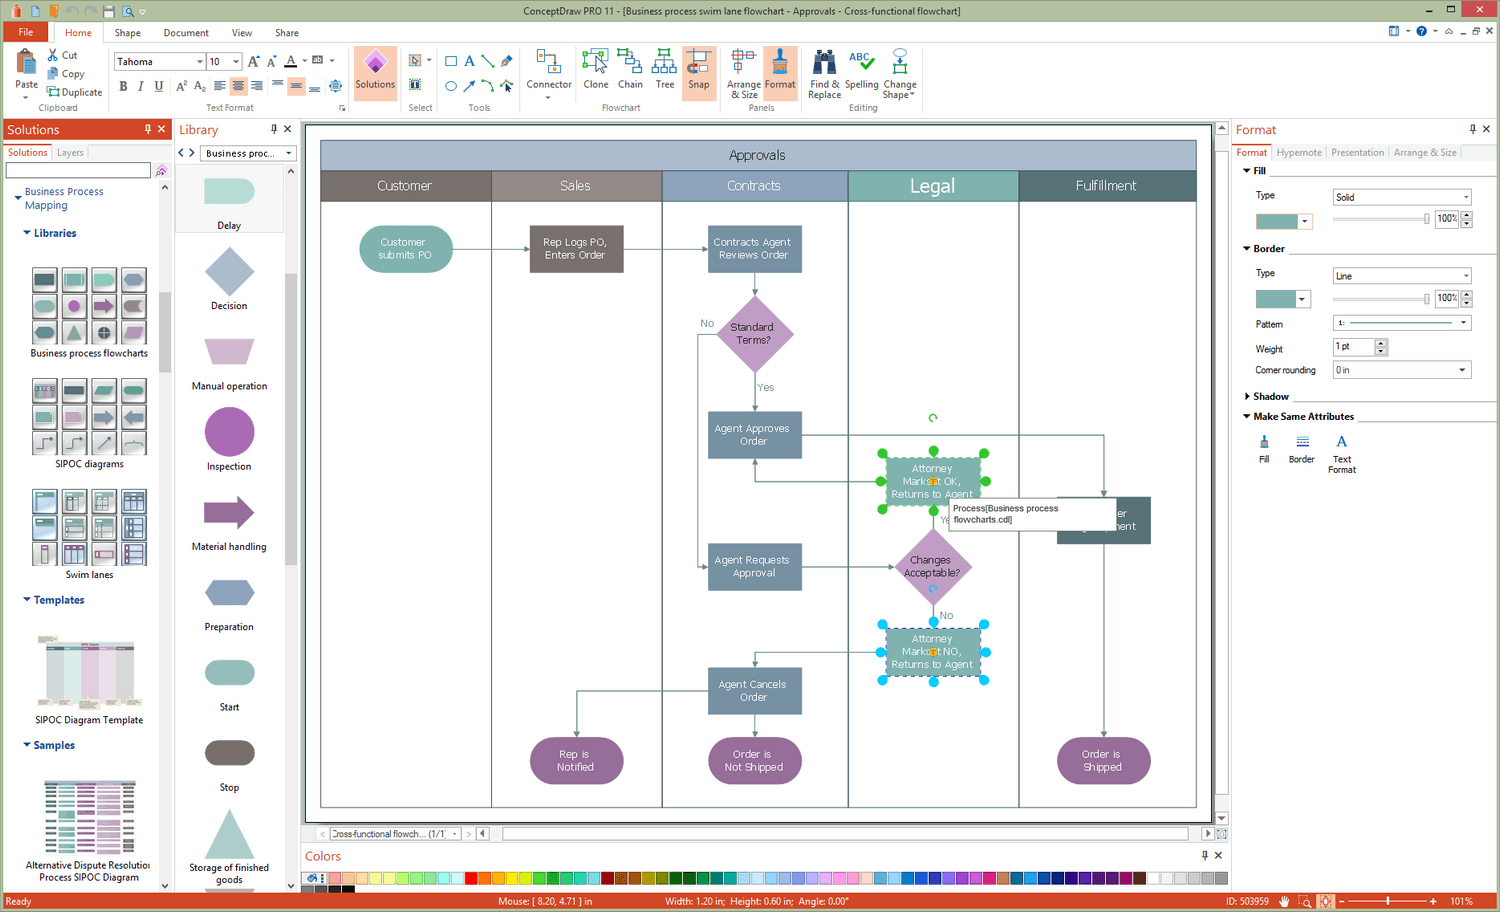 Business Process Mapping Solution | ConceptDraw.com